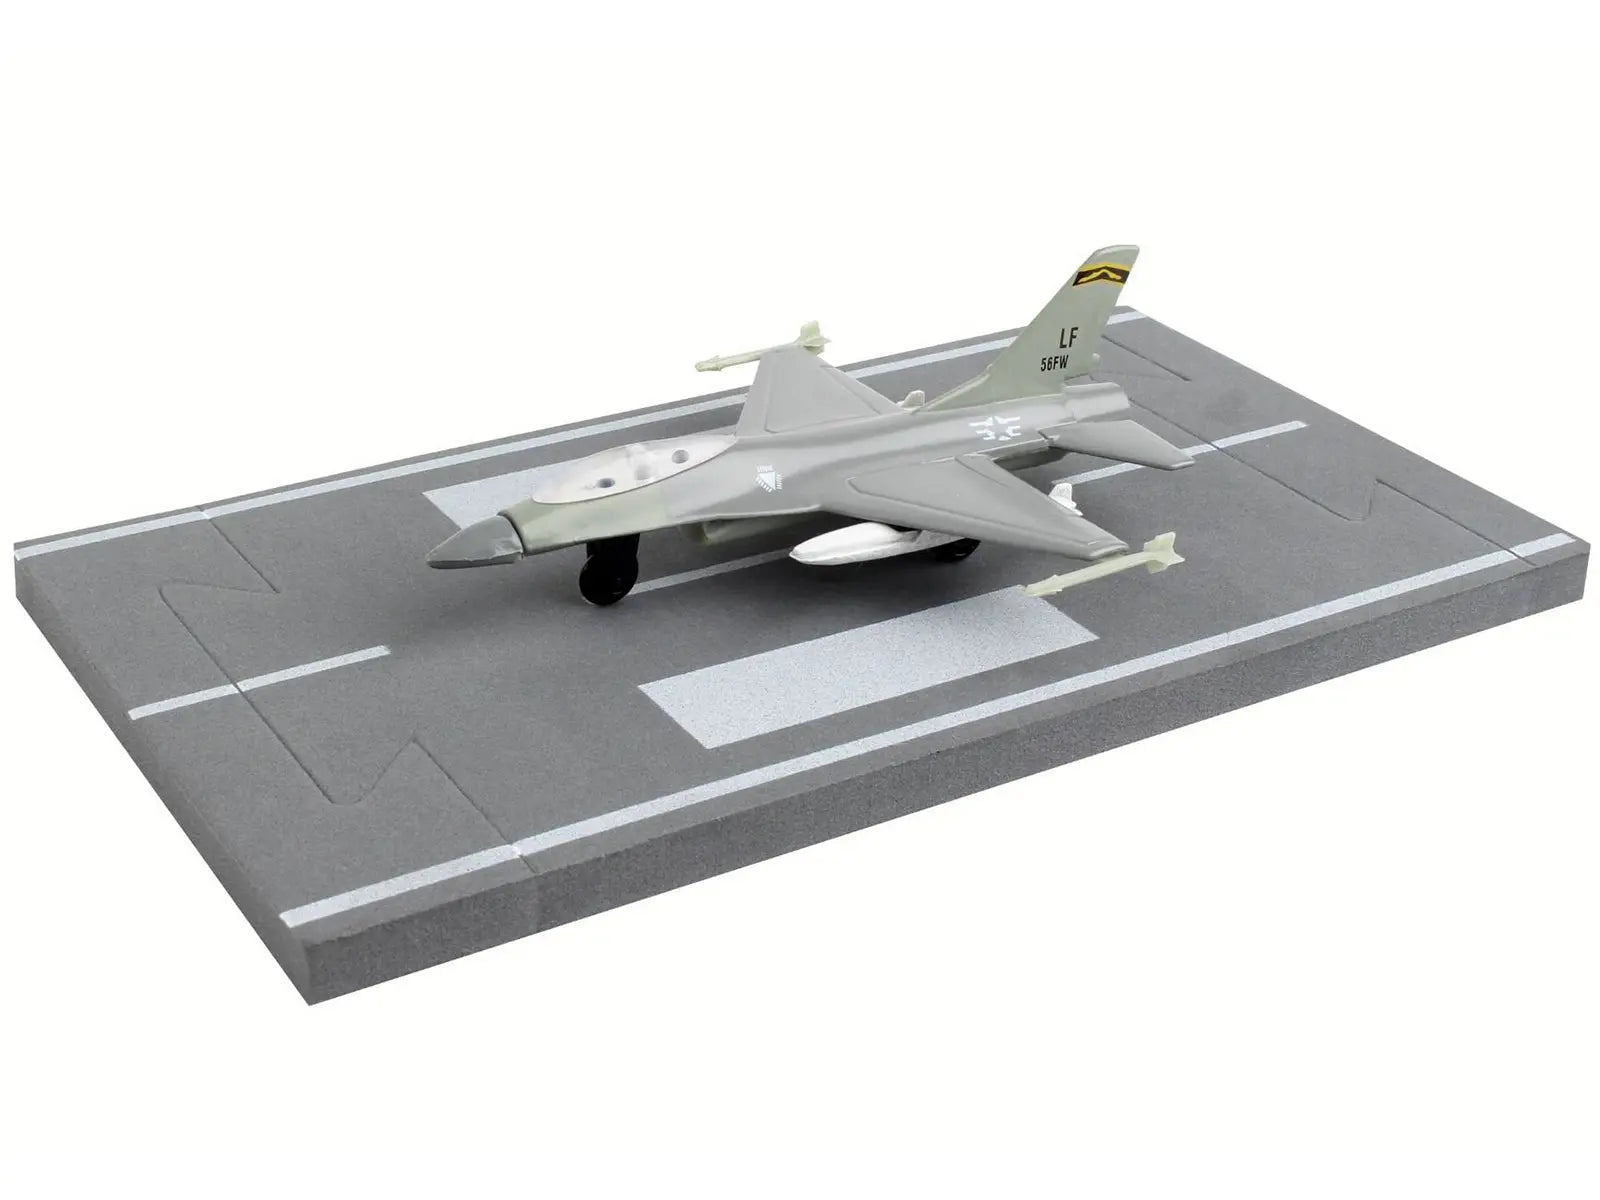 General Dynamics F-16 Fighting Falcon Fighter Aircraft Gray "United States Air Force" with Runway Section Diecast Model Airplane by Runway24 Runway24